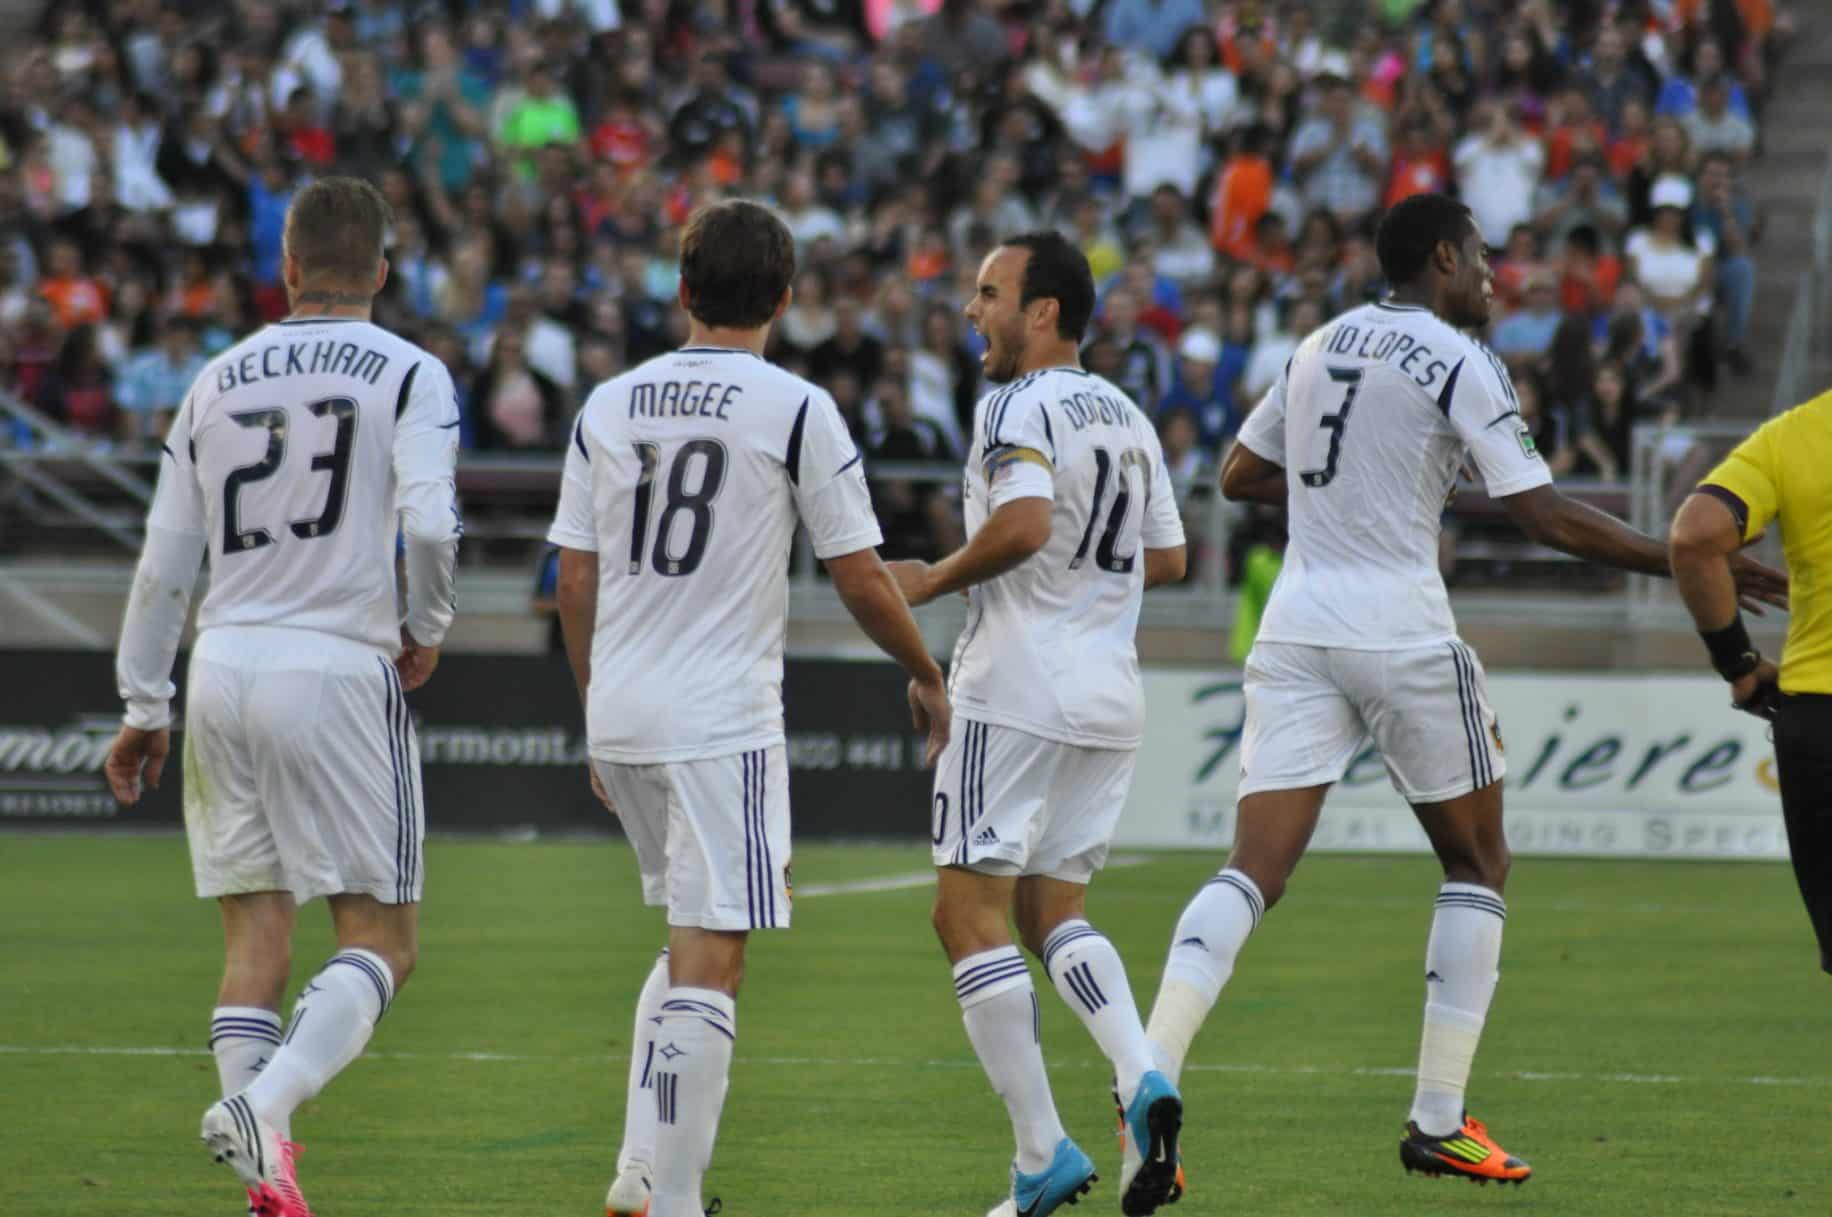 Galaxy Players Beckham, McGee, Donovan, Lopes. Photo Credit: Aaron Sholl - Under Creative Commons License